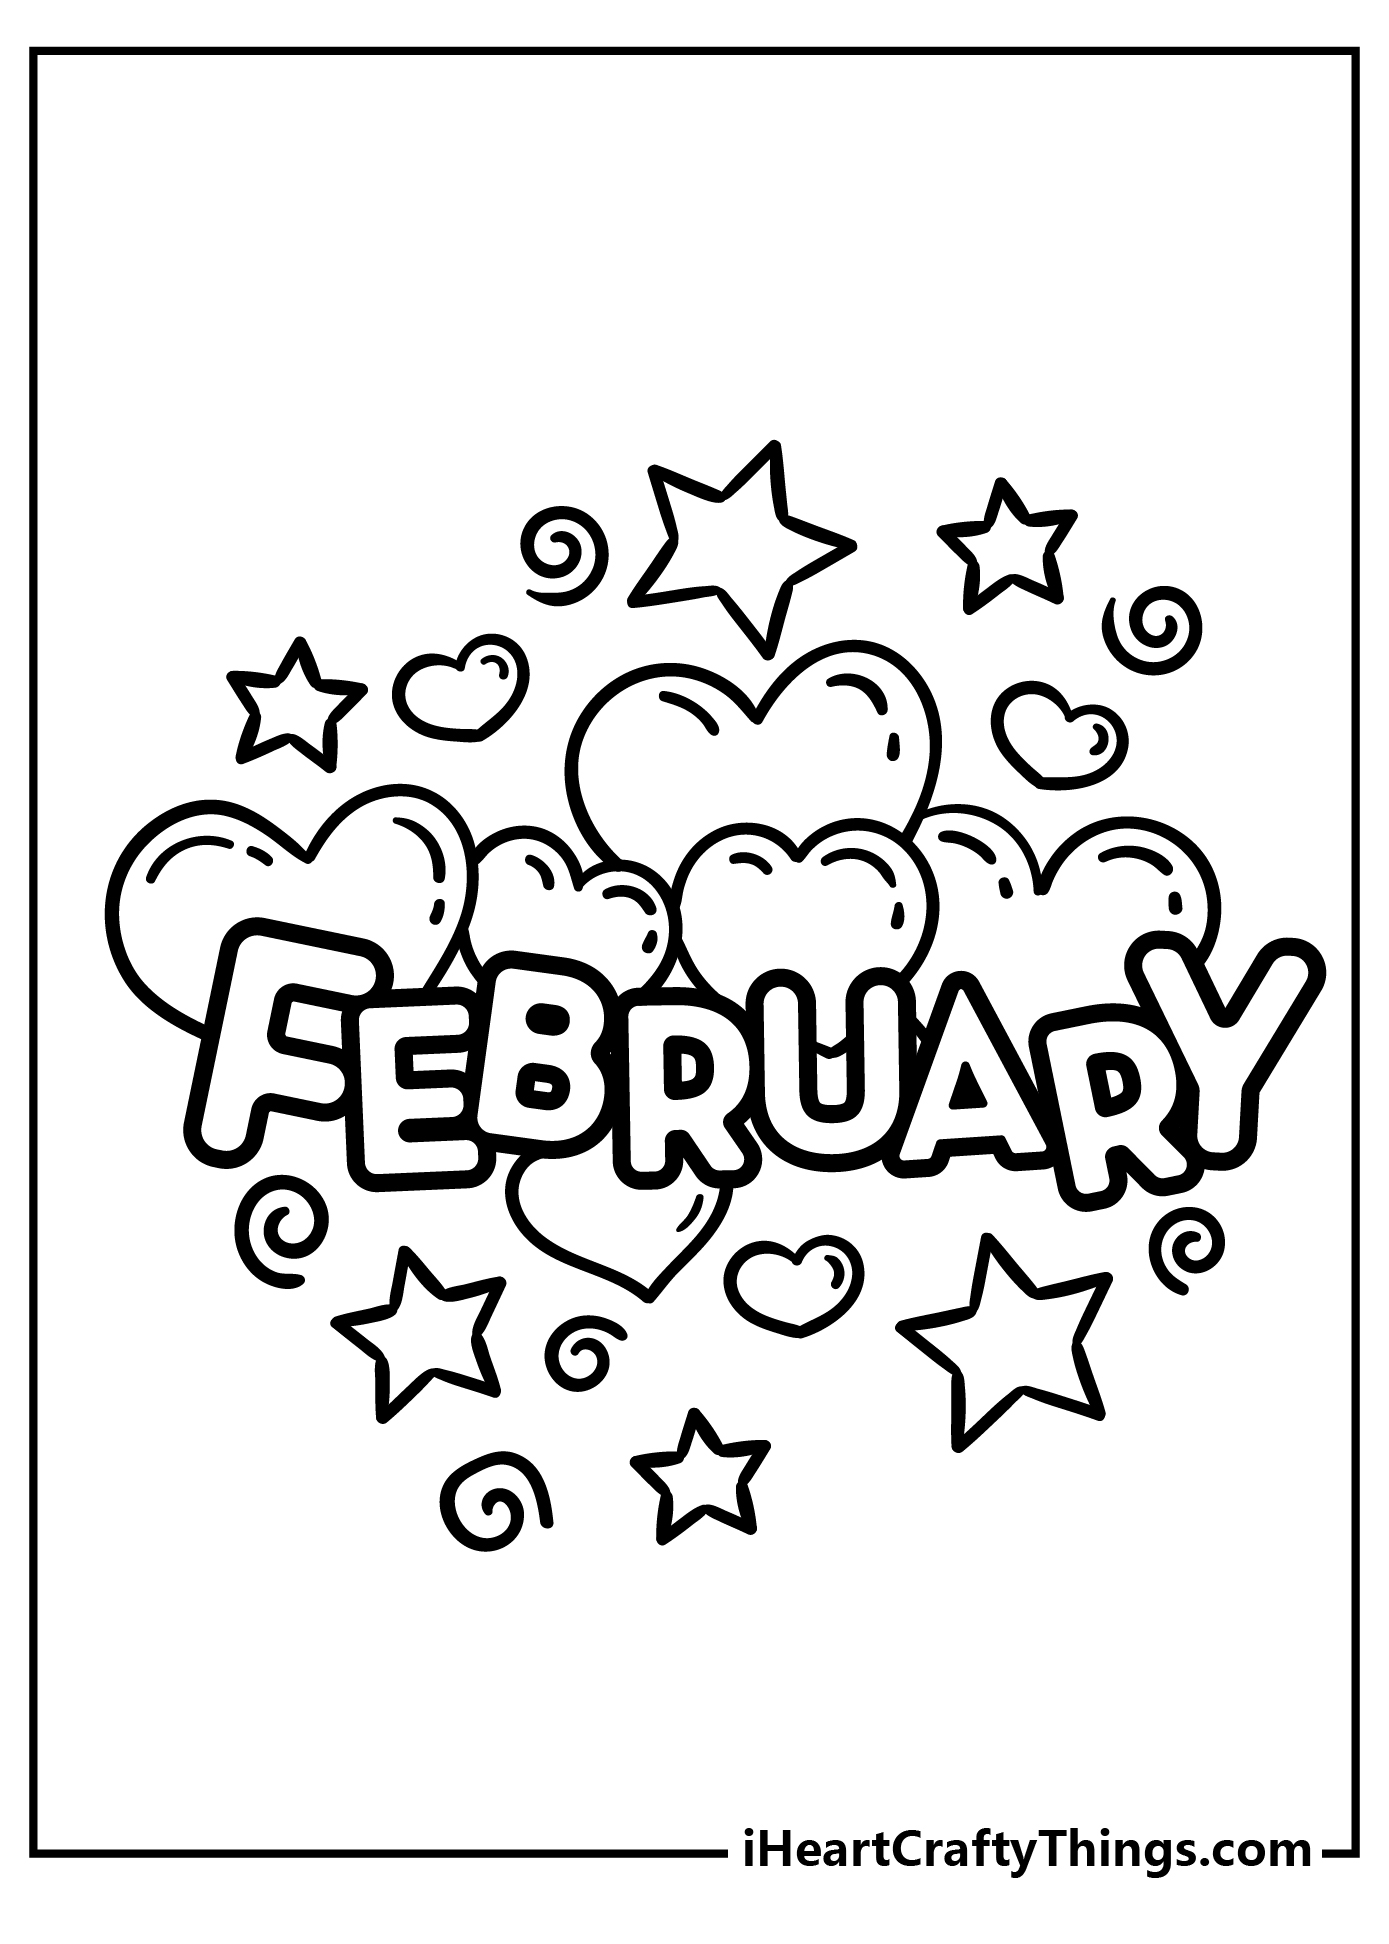 February Coloring Pages for preschoolers free printable